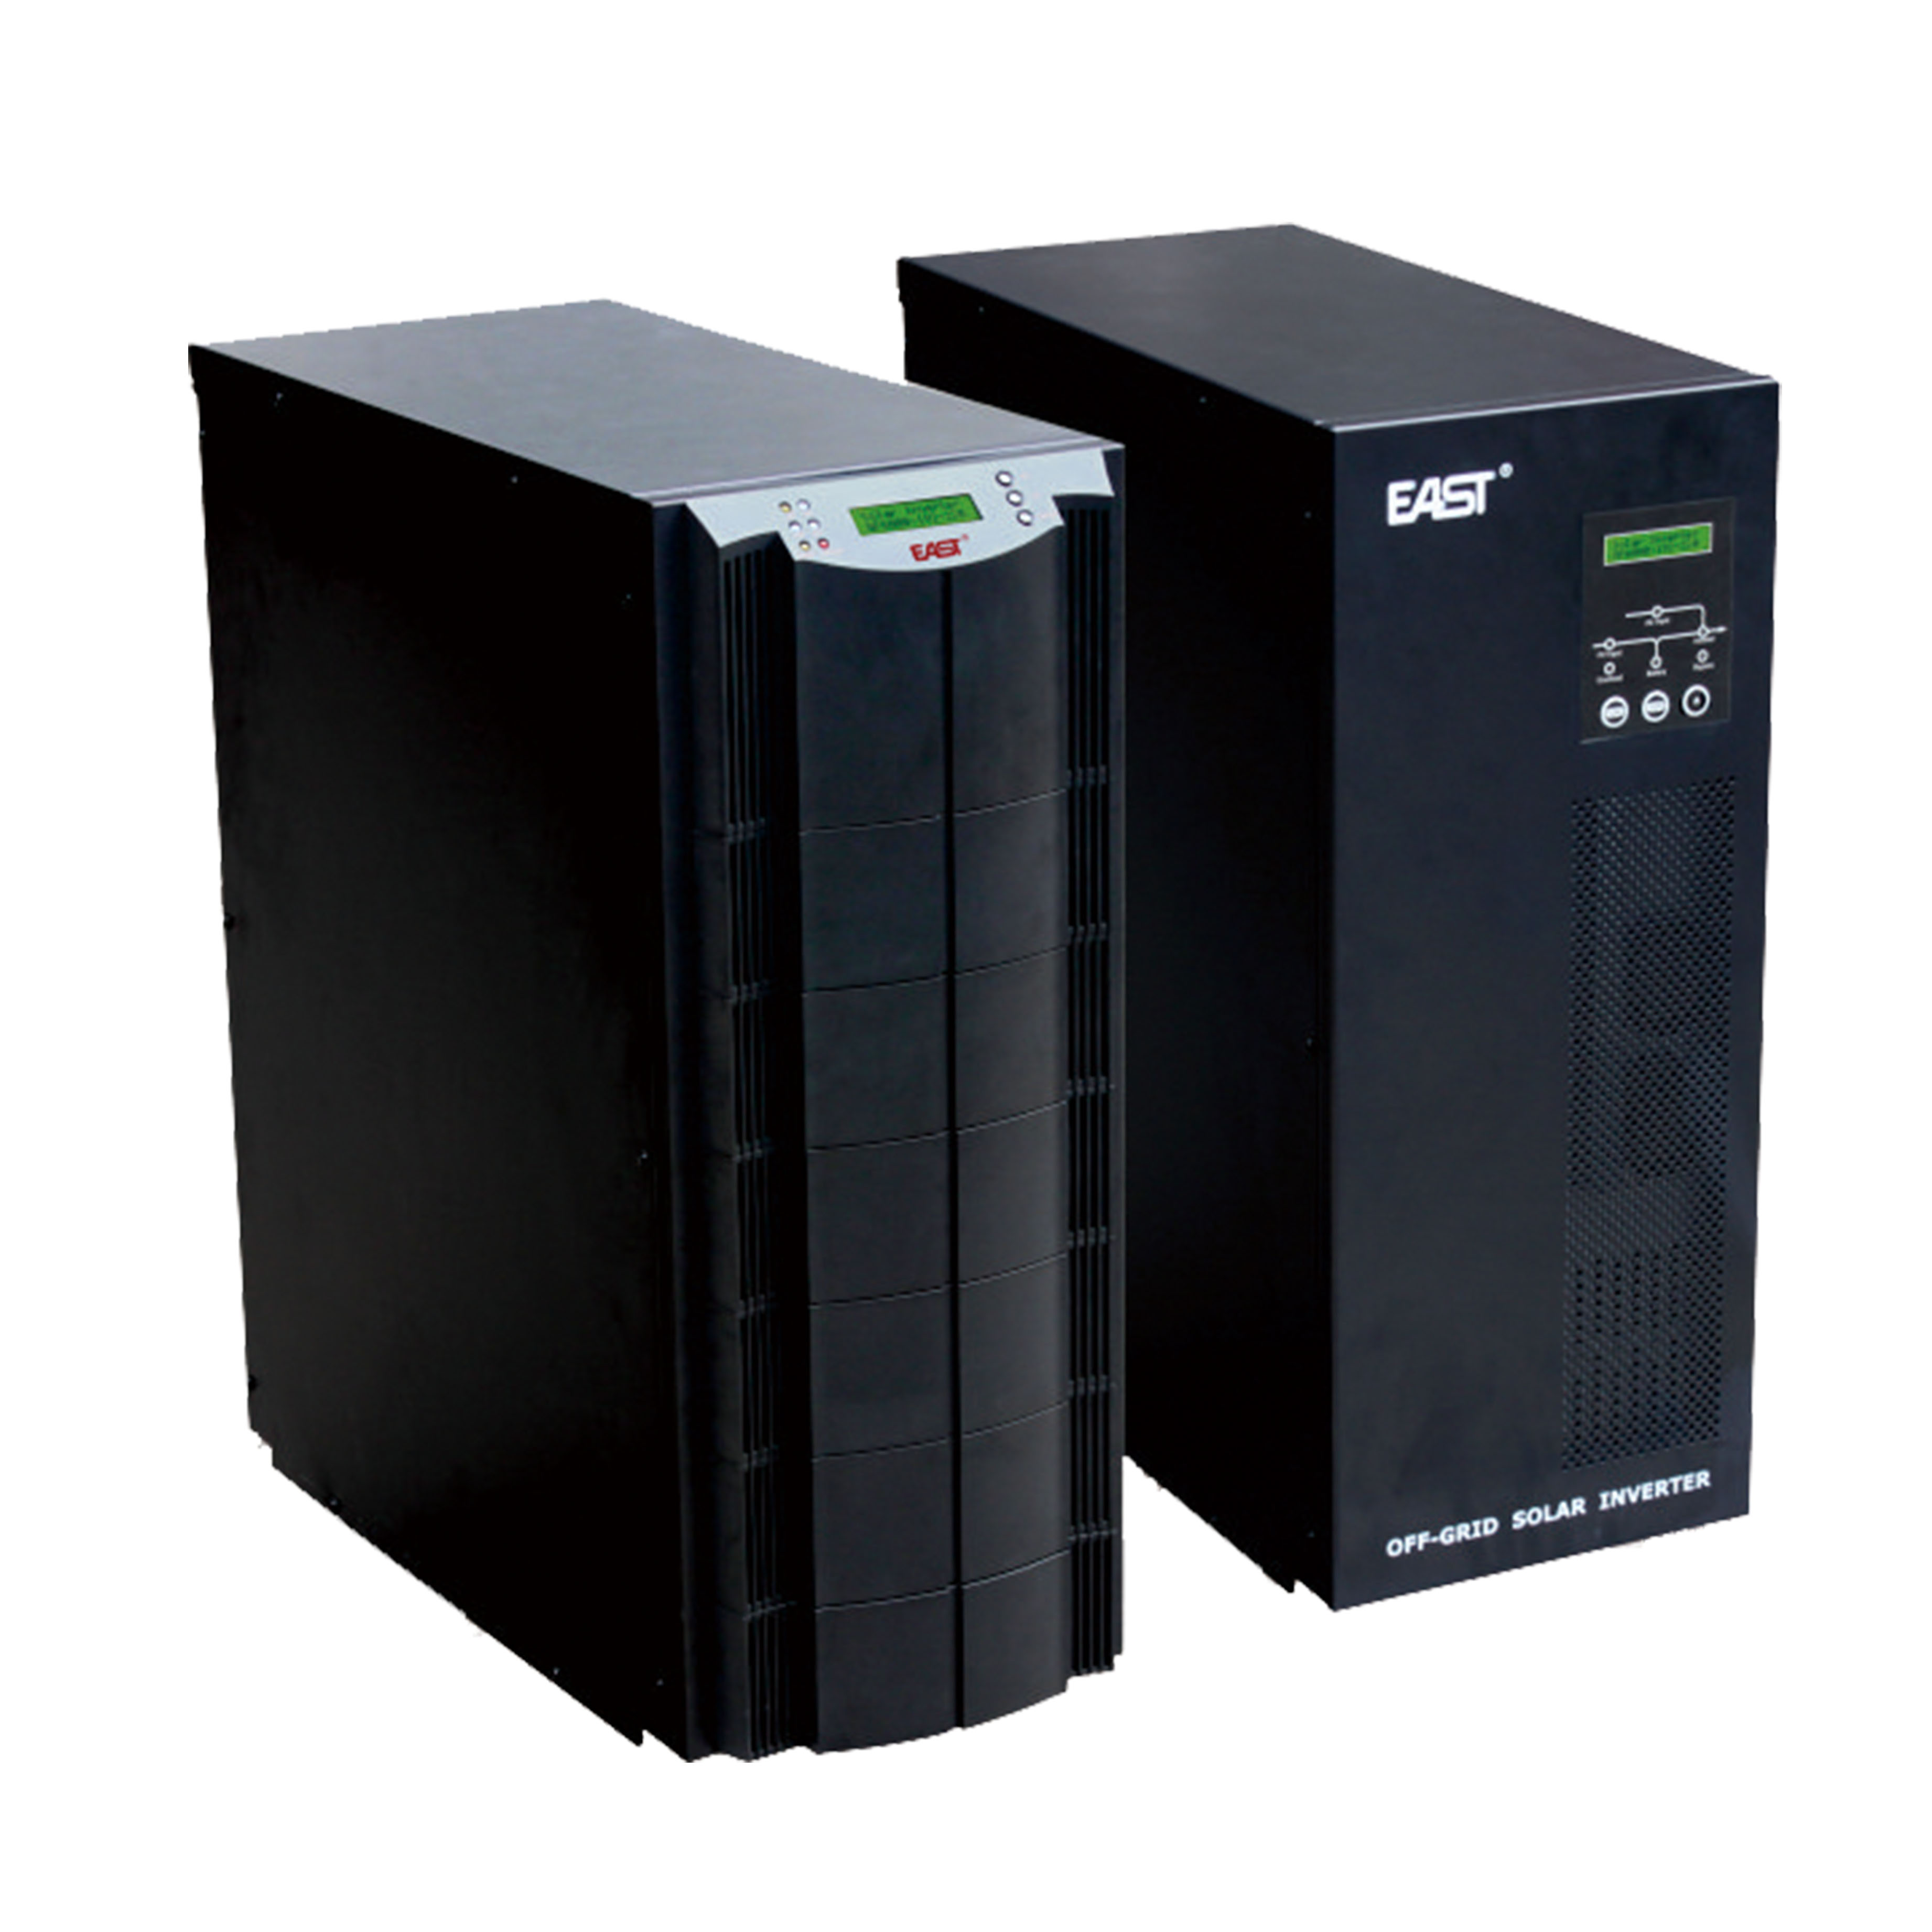 Off-Grid Solar Inverter 3 - 8 kW - EAST Group Limited by Share Ltd